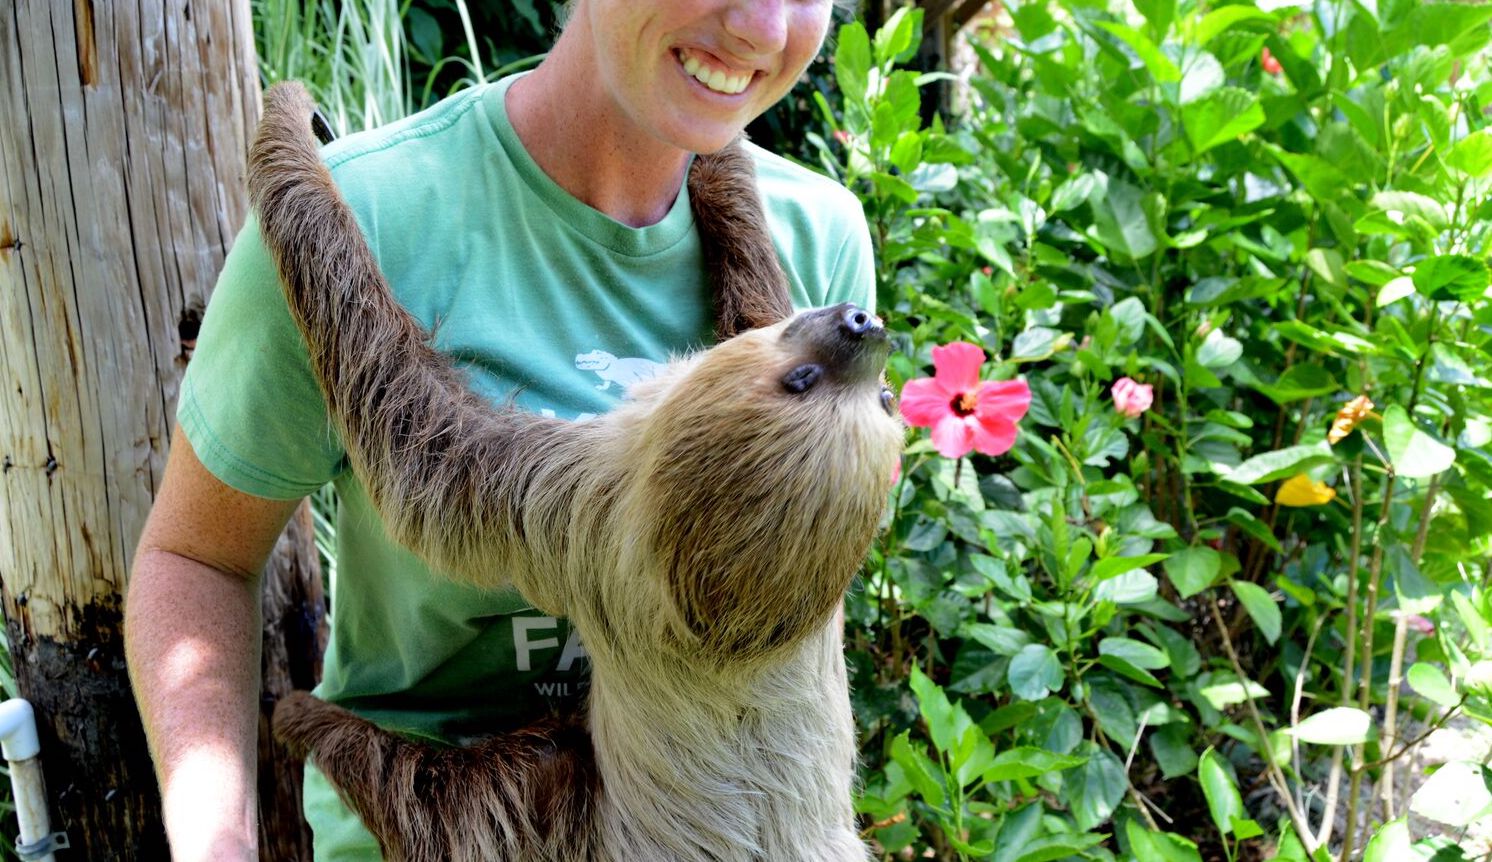 VIP Sloth Experience: Hugging a sloth for a cause